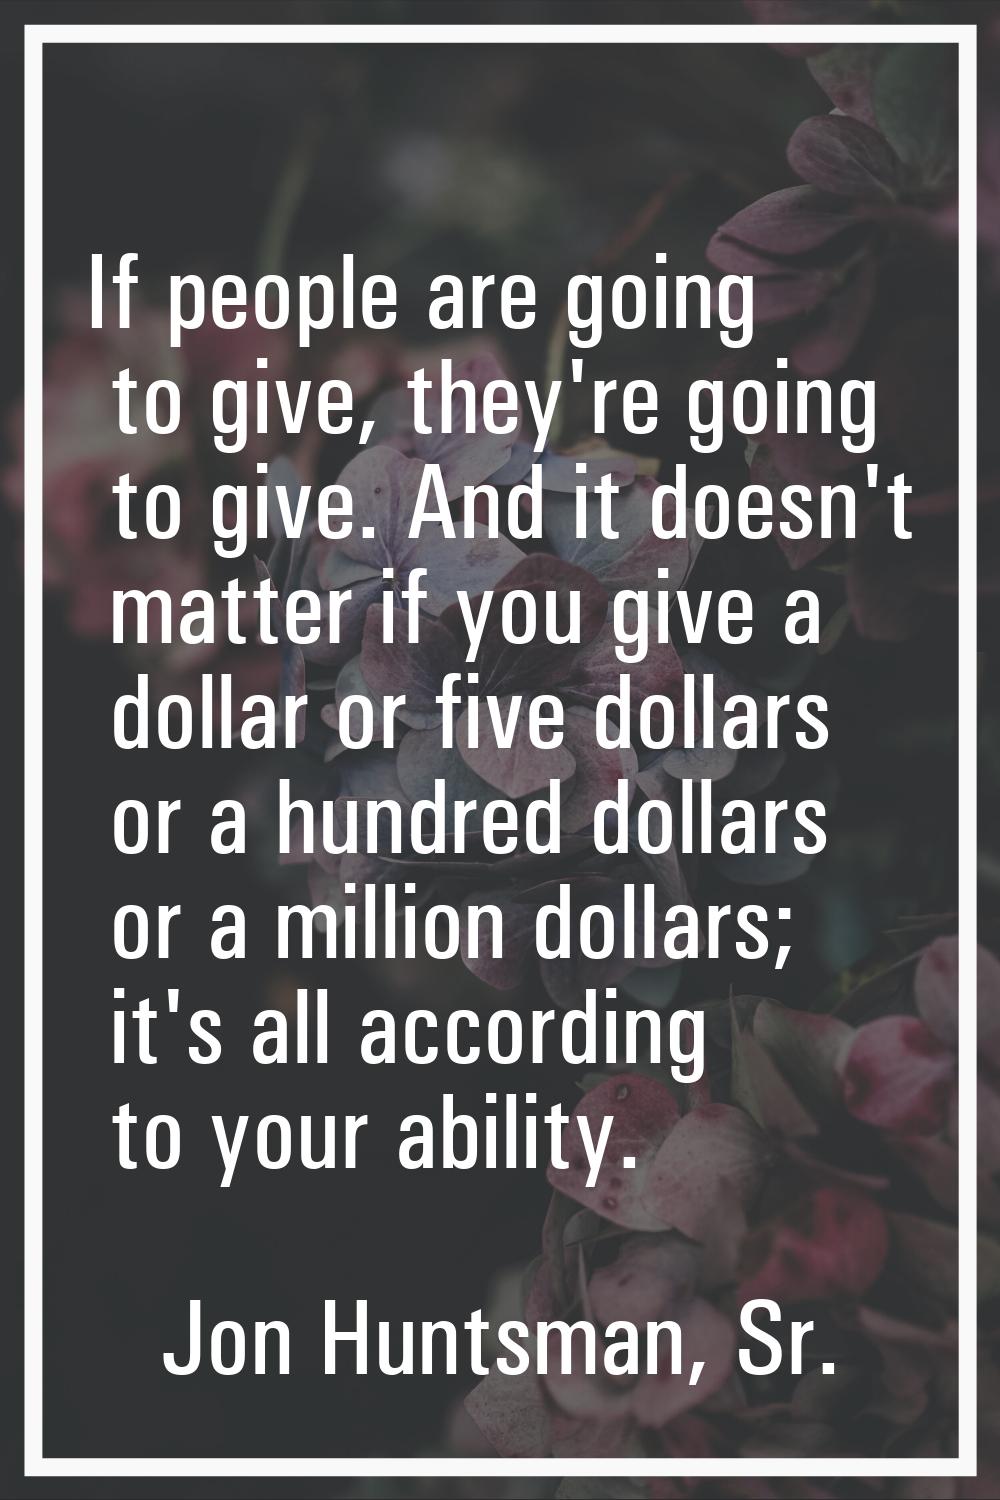 If people are going to give, they're going to give. And it doesn't matter if you give a dollar or f